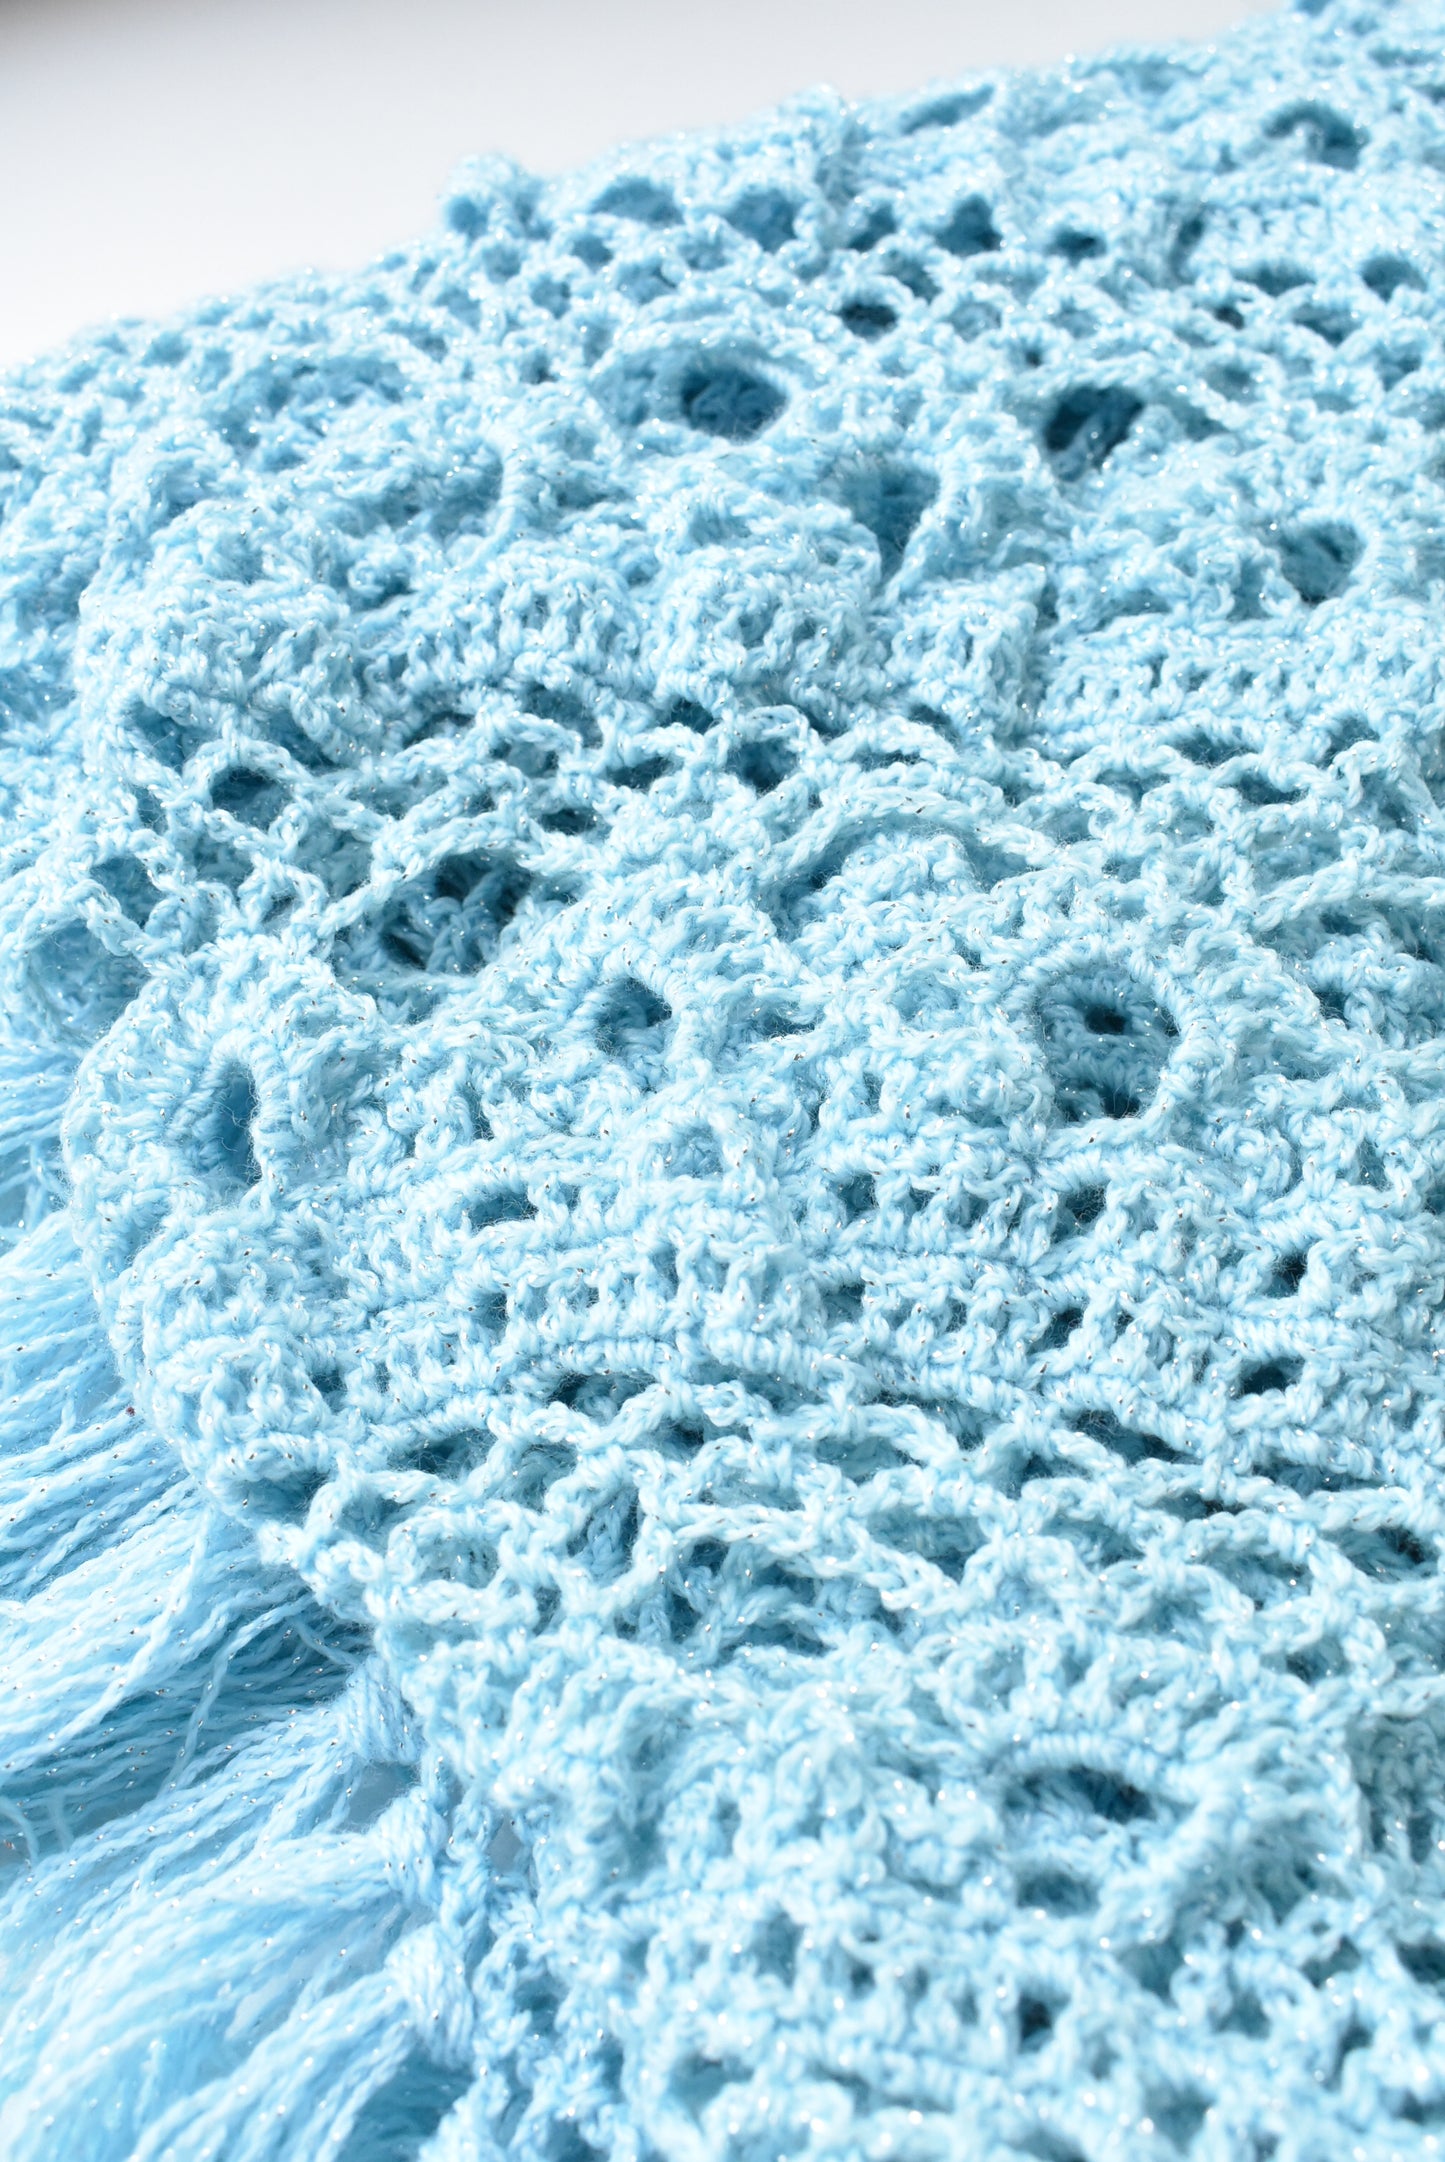 Sparkly hand crocheted shawl